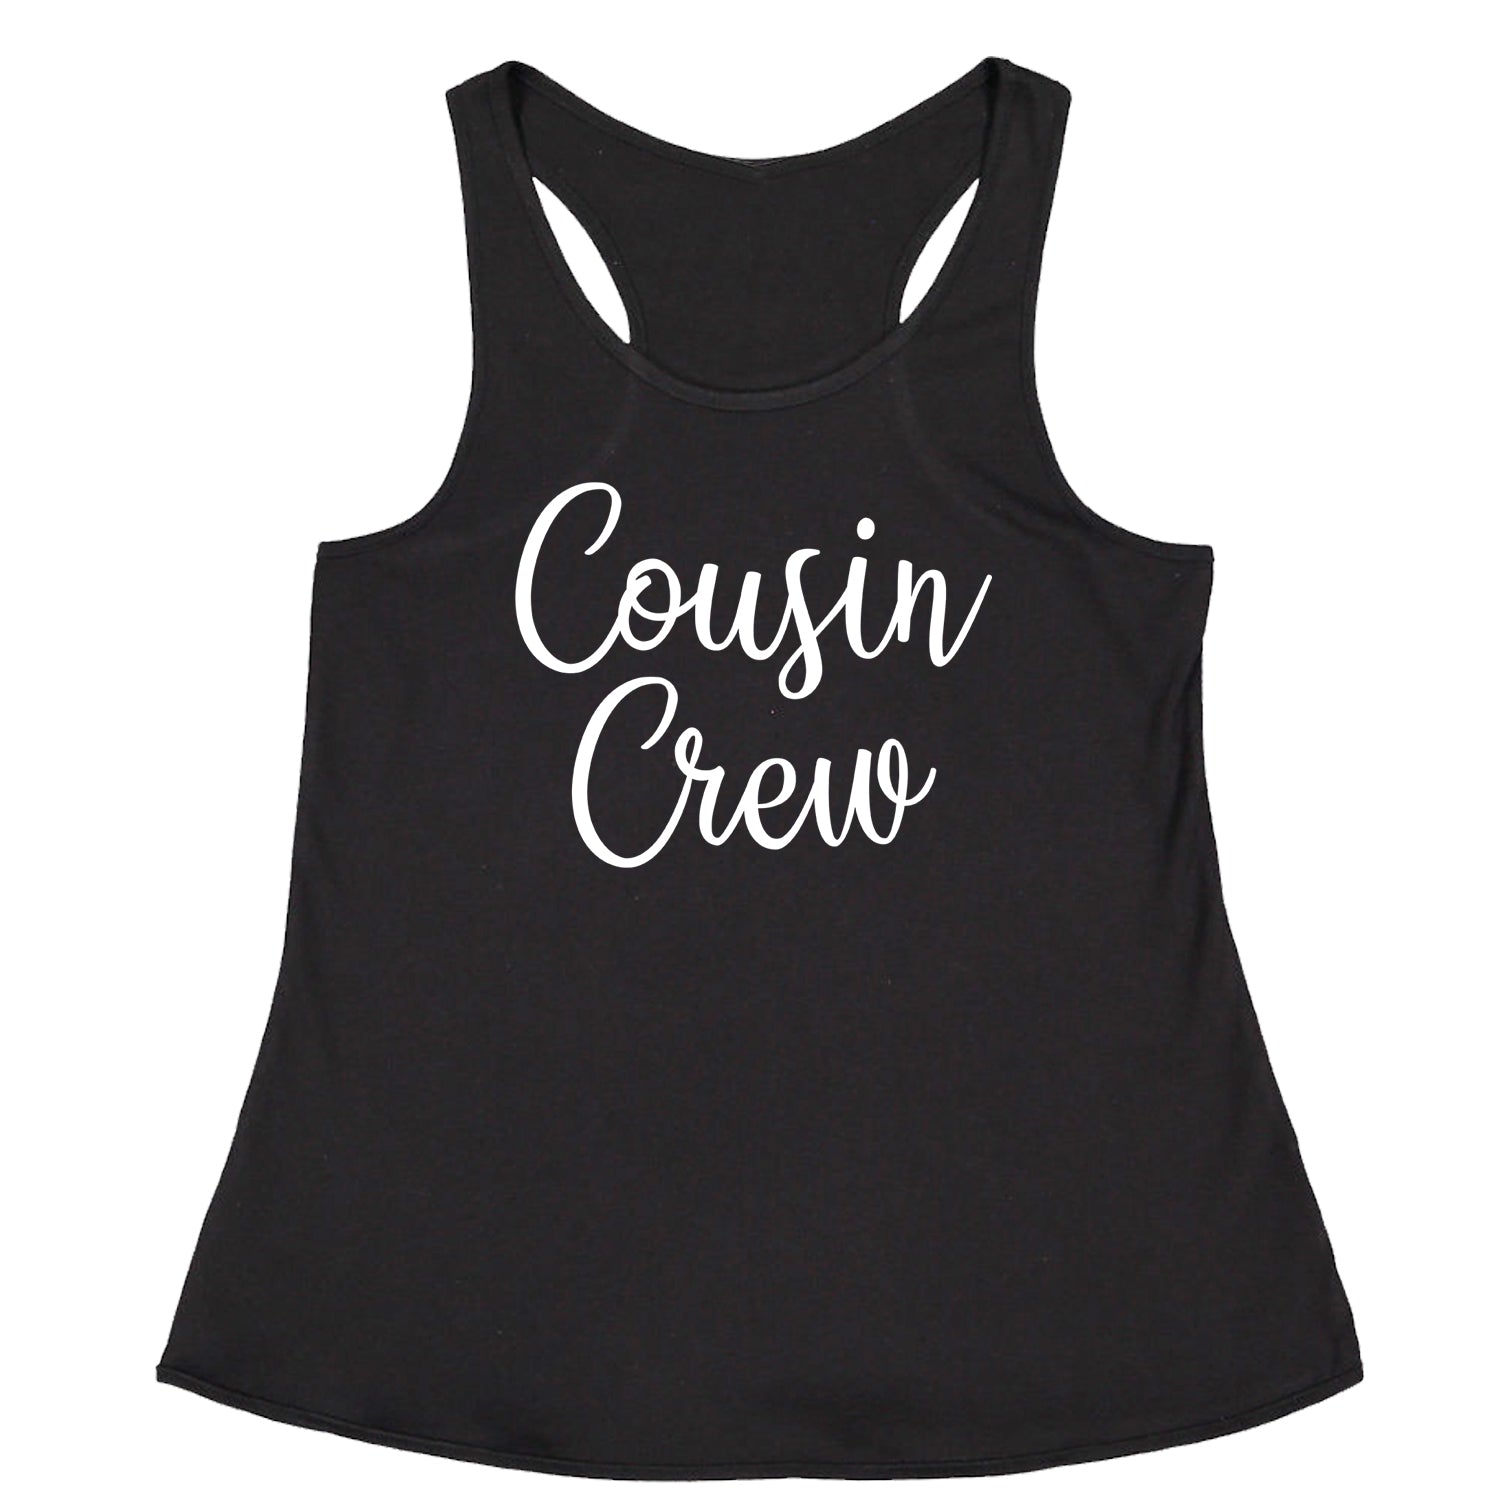 Cousin Crew Fun Family Outfit Racerback Tank Top for Women barbecue, bbq, cook, family, out, reunion by Expression Tees